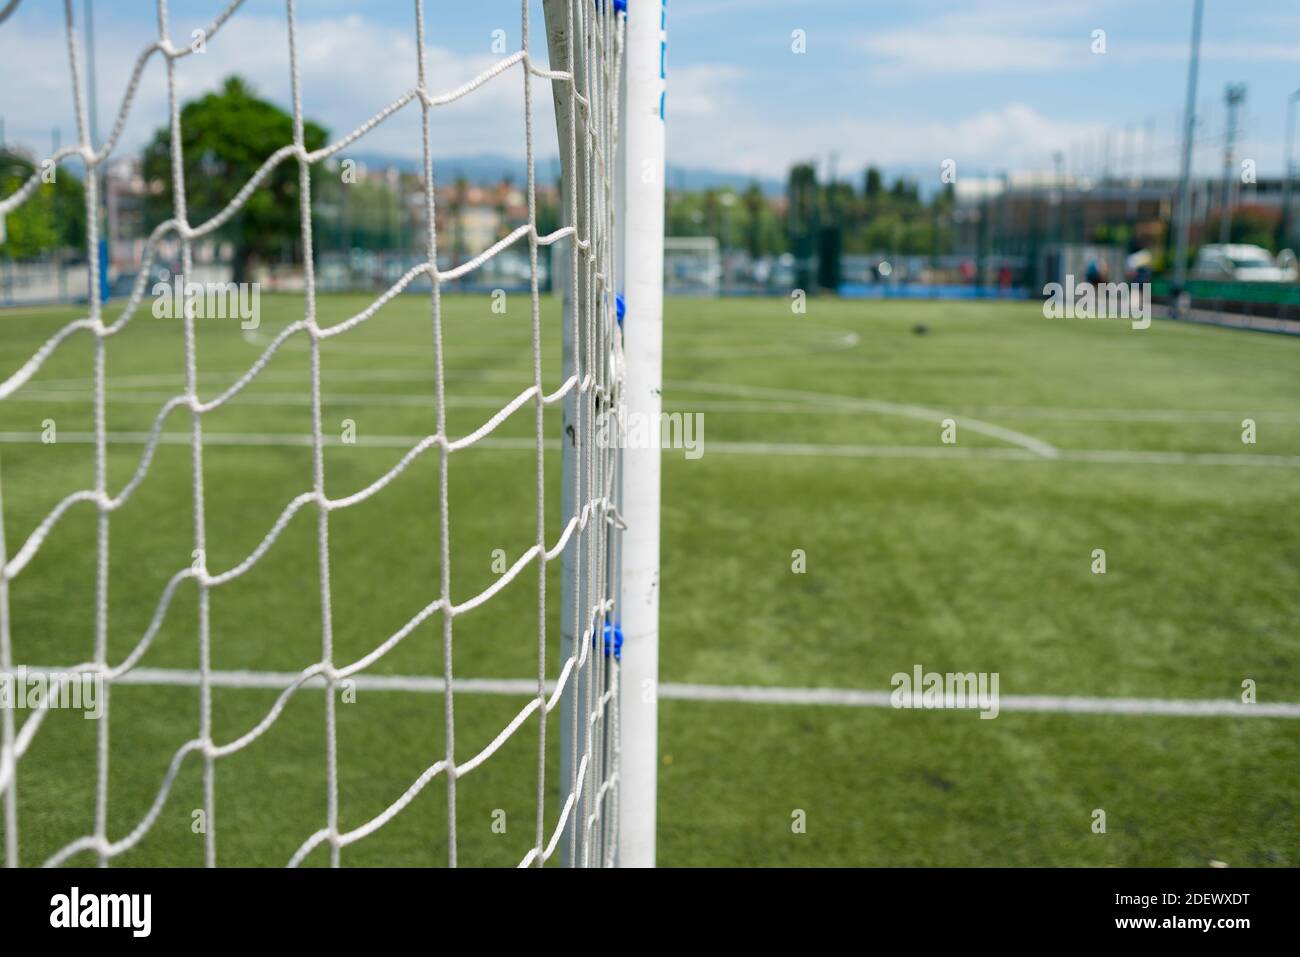 Soccer Net Background View From Behind The Goal With Blurred Stadium And Field Pitch Stock Photo Alamy